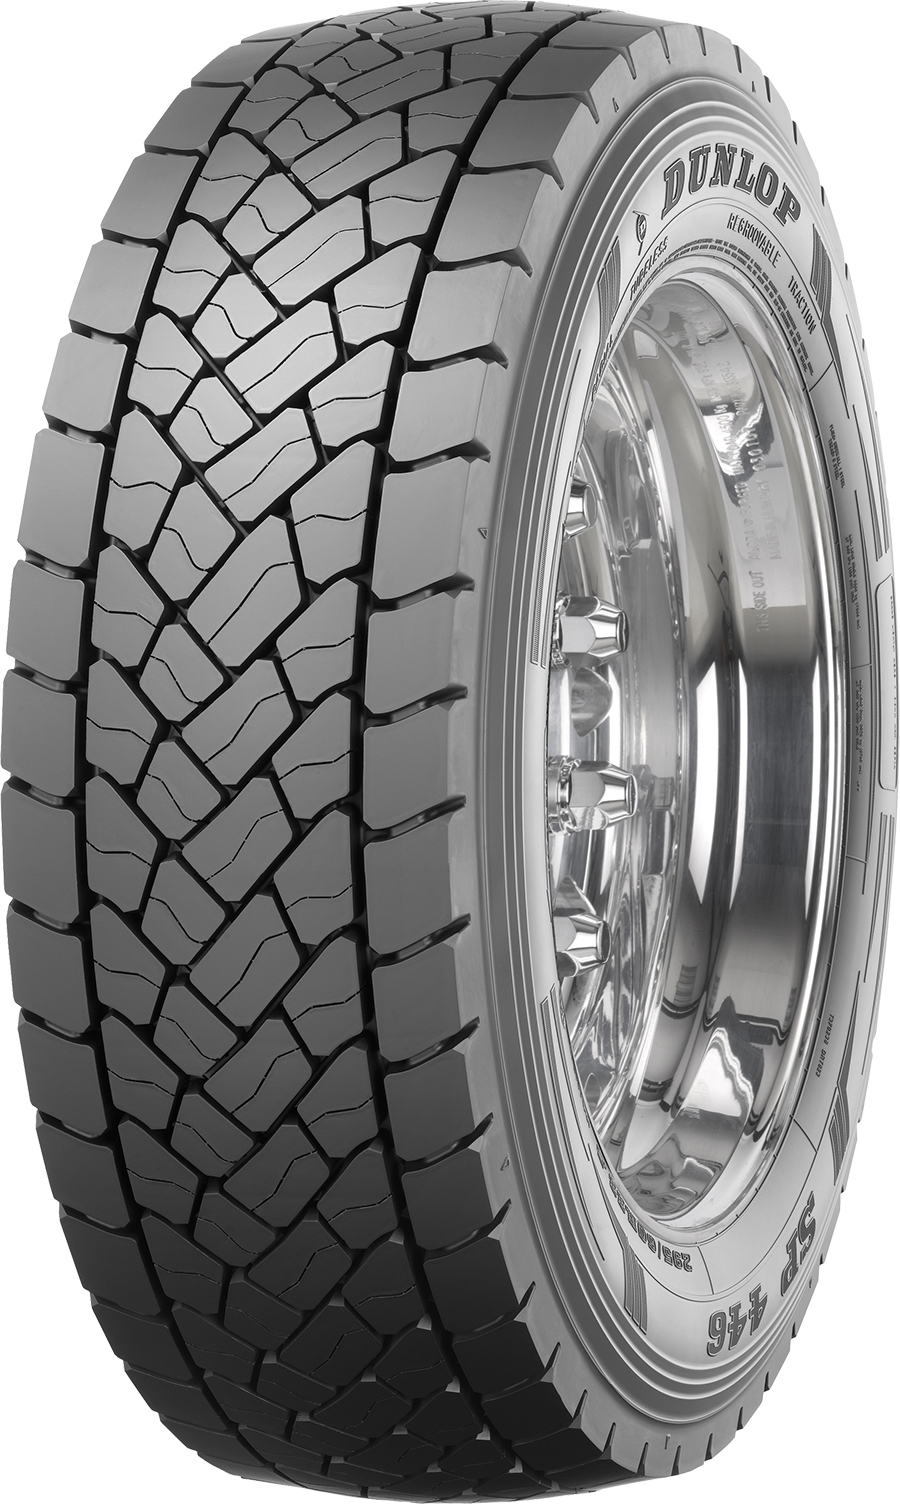 product_type-heavy_tires DUNLOP SP446 245/70 R17.5 136M